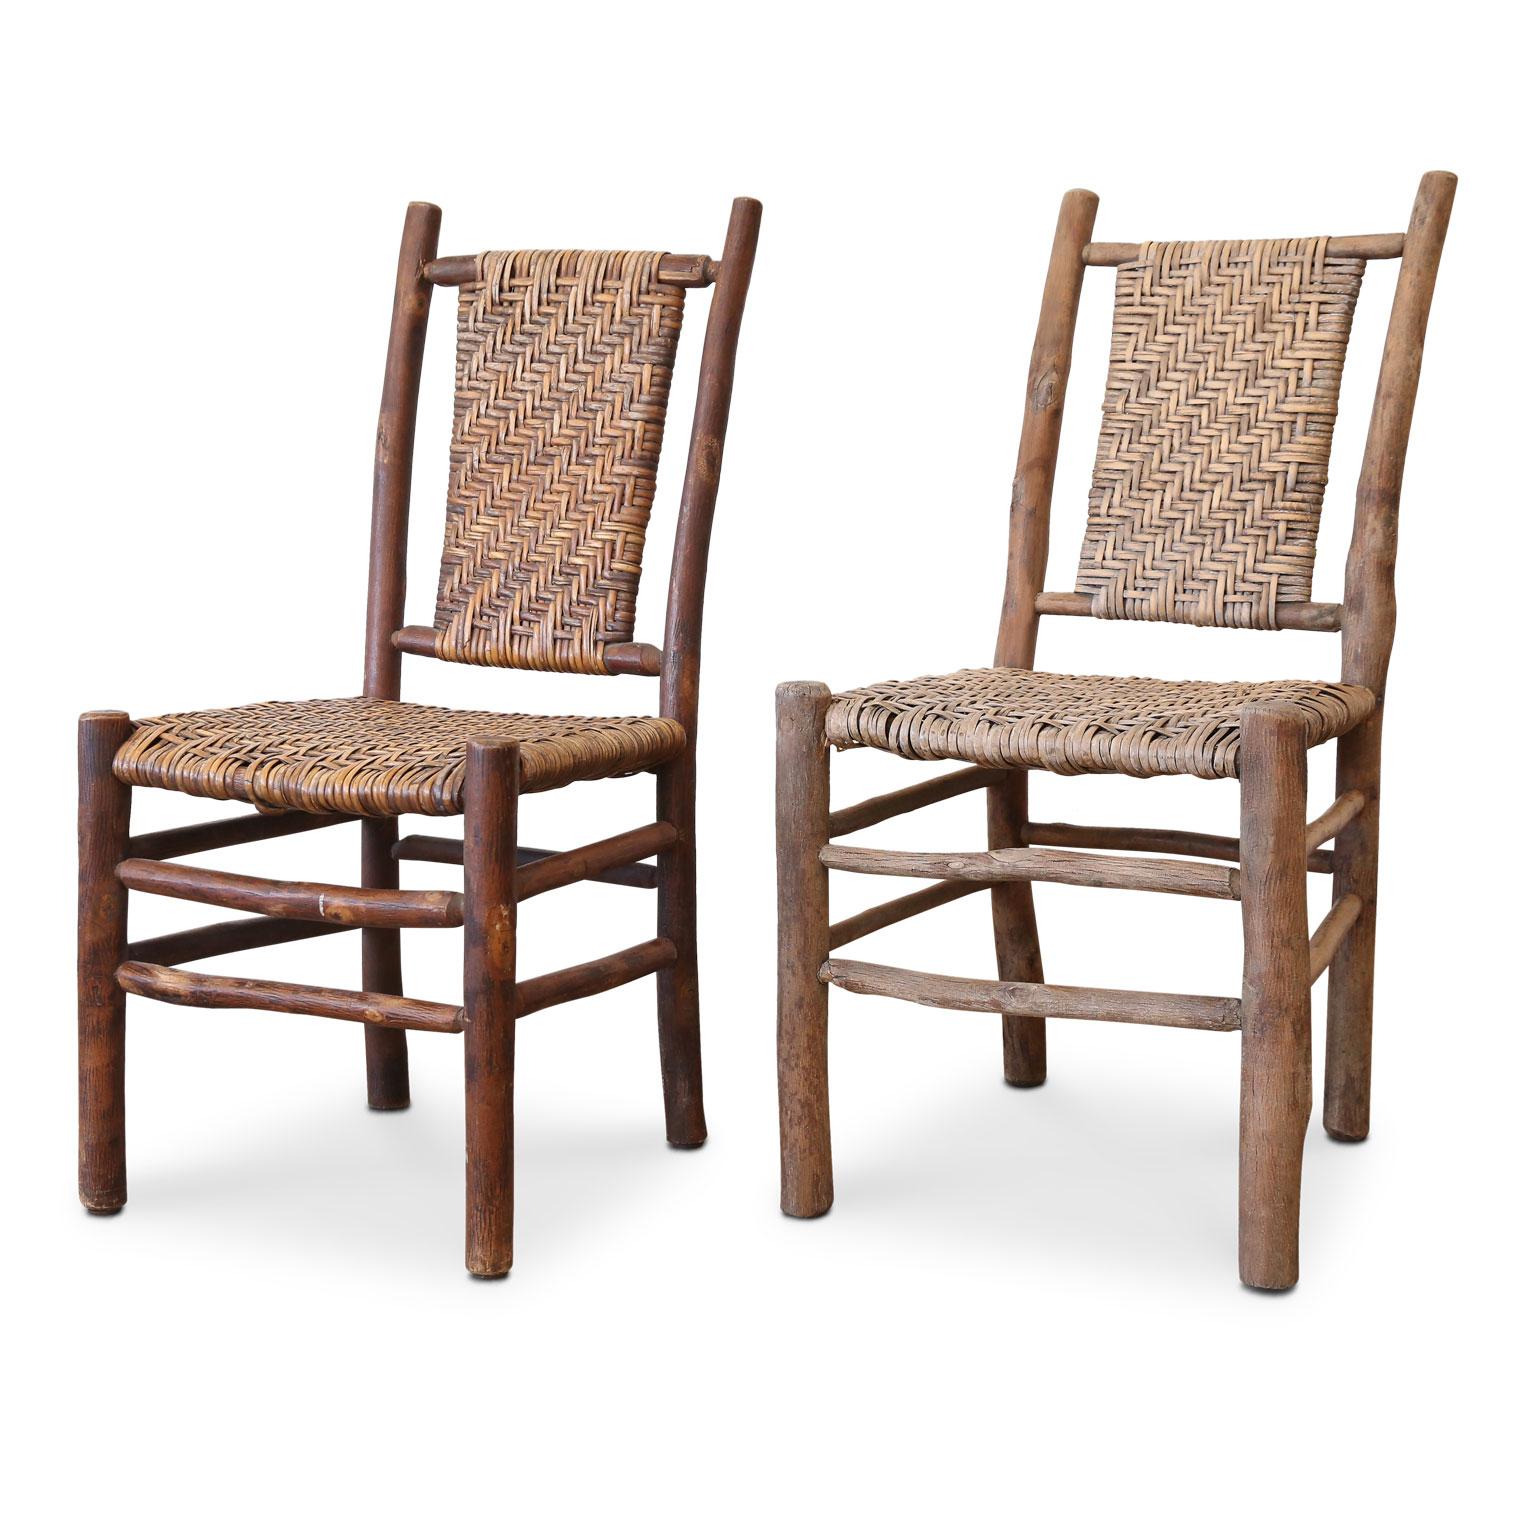 Two old hickory side chairs made of natural wood and exposed bark, with original handwoven seats and backs, and a beautiful subtle sun-bleached patina. Genuine Folk Art pieces signed and created, circa 1933-1942 for the Adirondack civilian